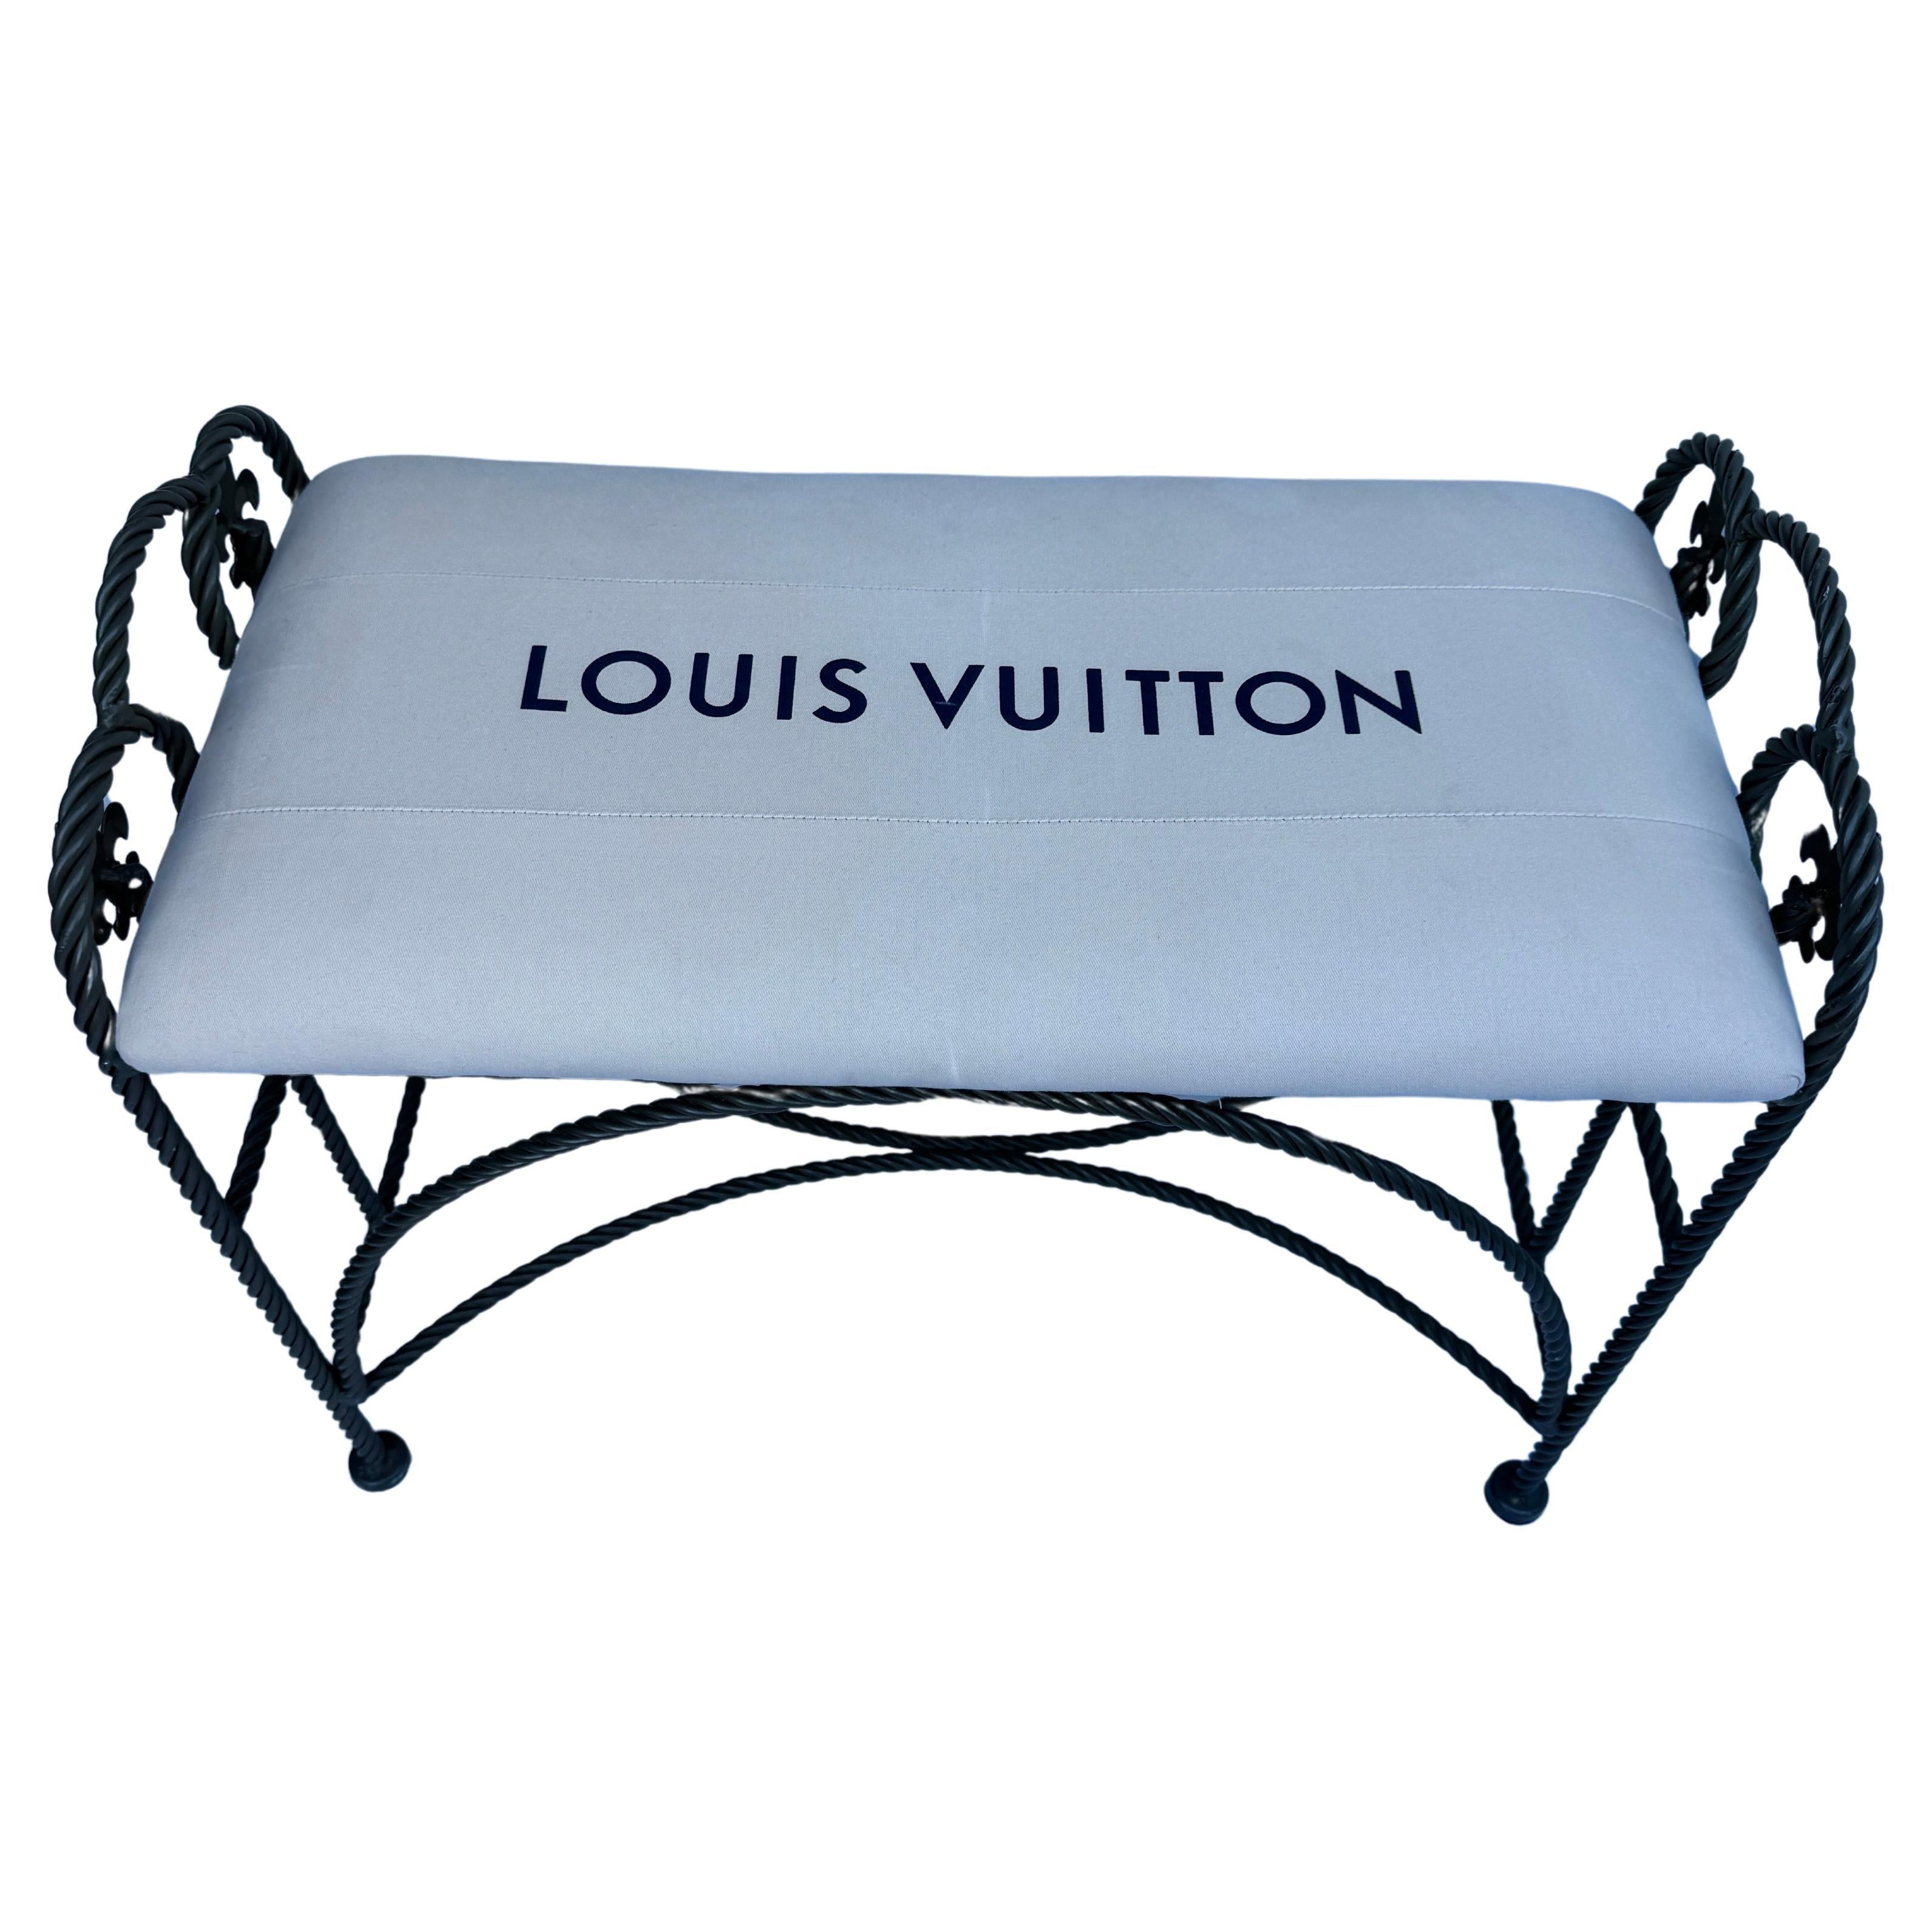 French Vintage Roped Iron Bench With Louis Vuitton Bag Fabric